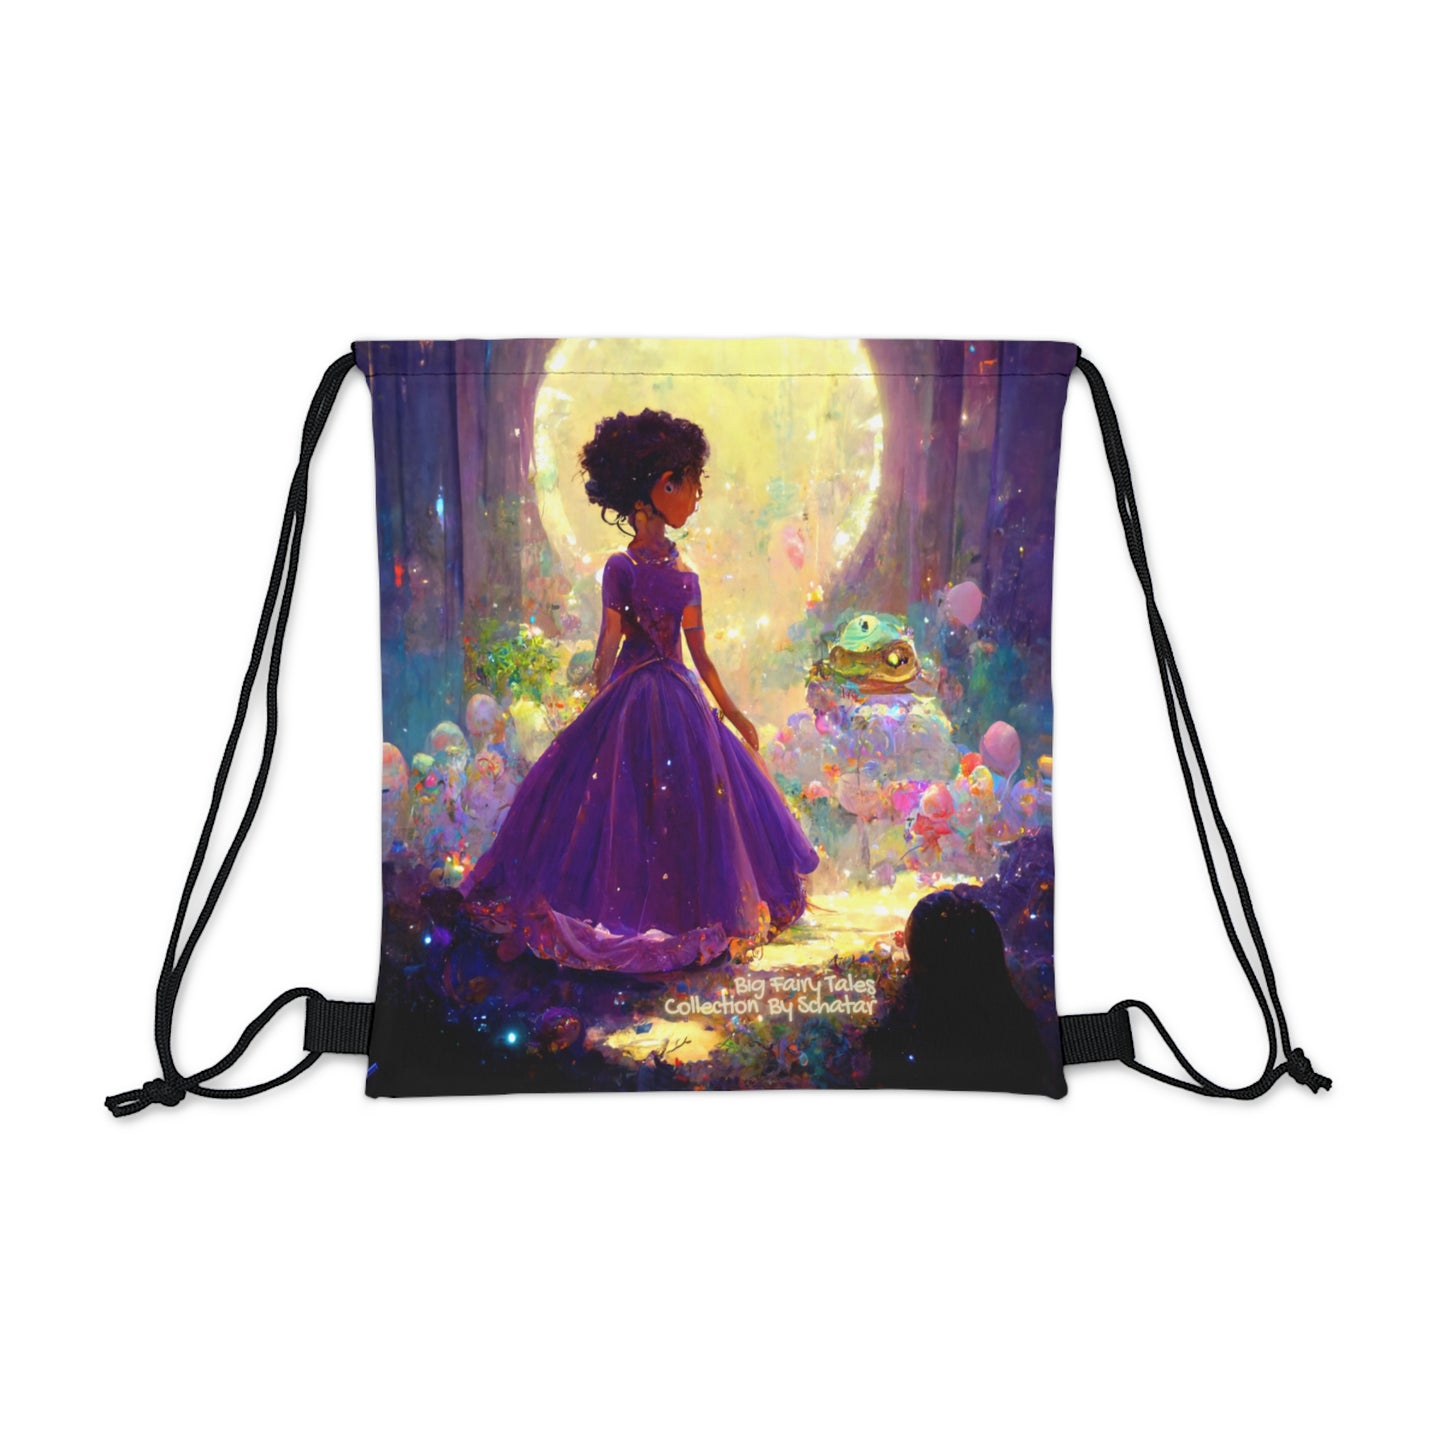 Big Fairy Tales By Schatar Princess And Frog Prince Cinch Sack